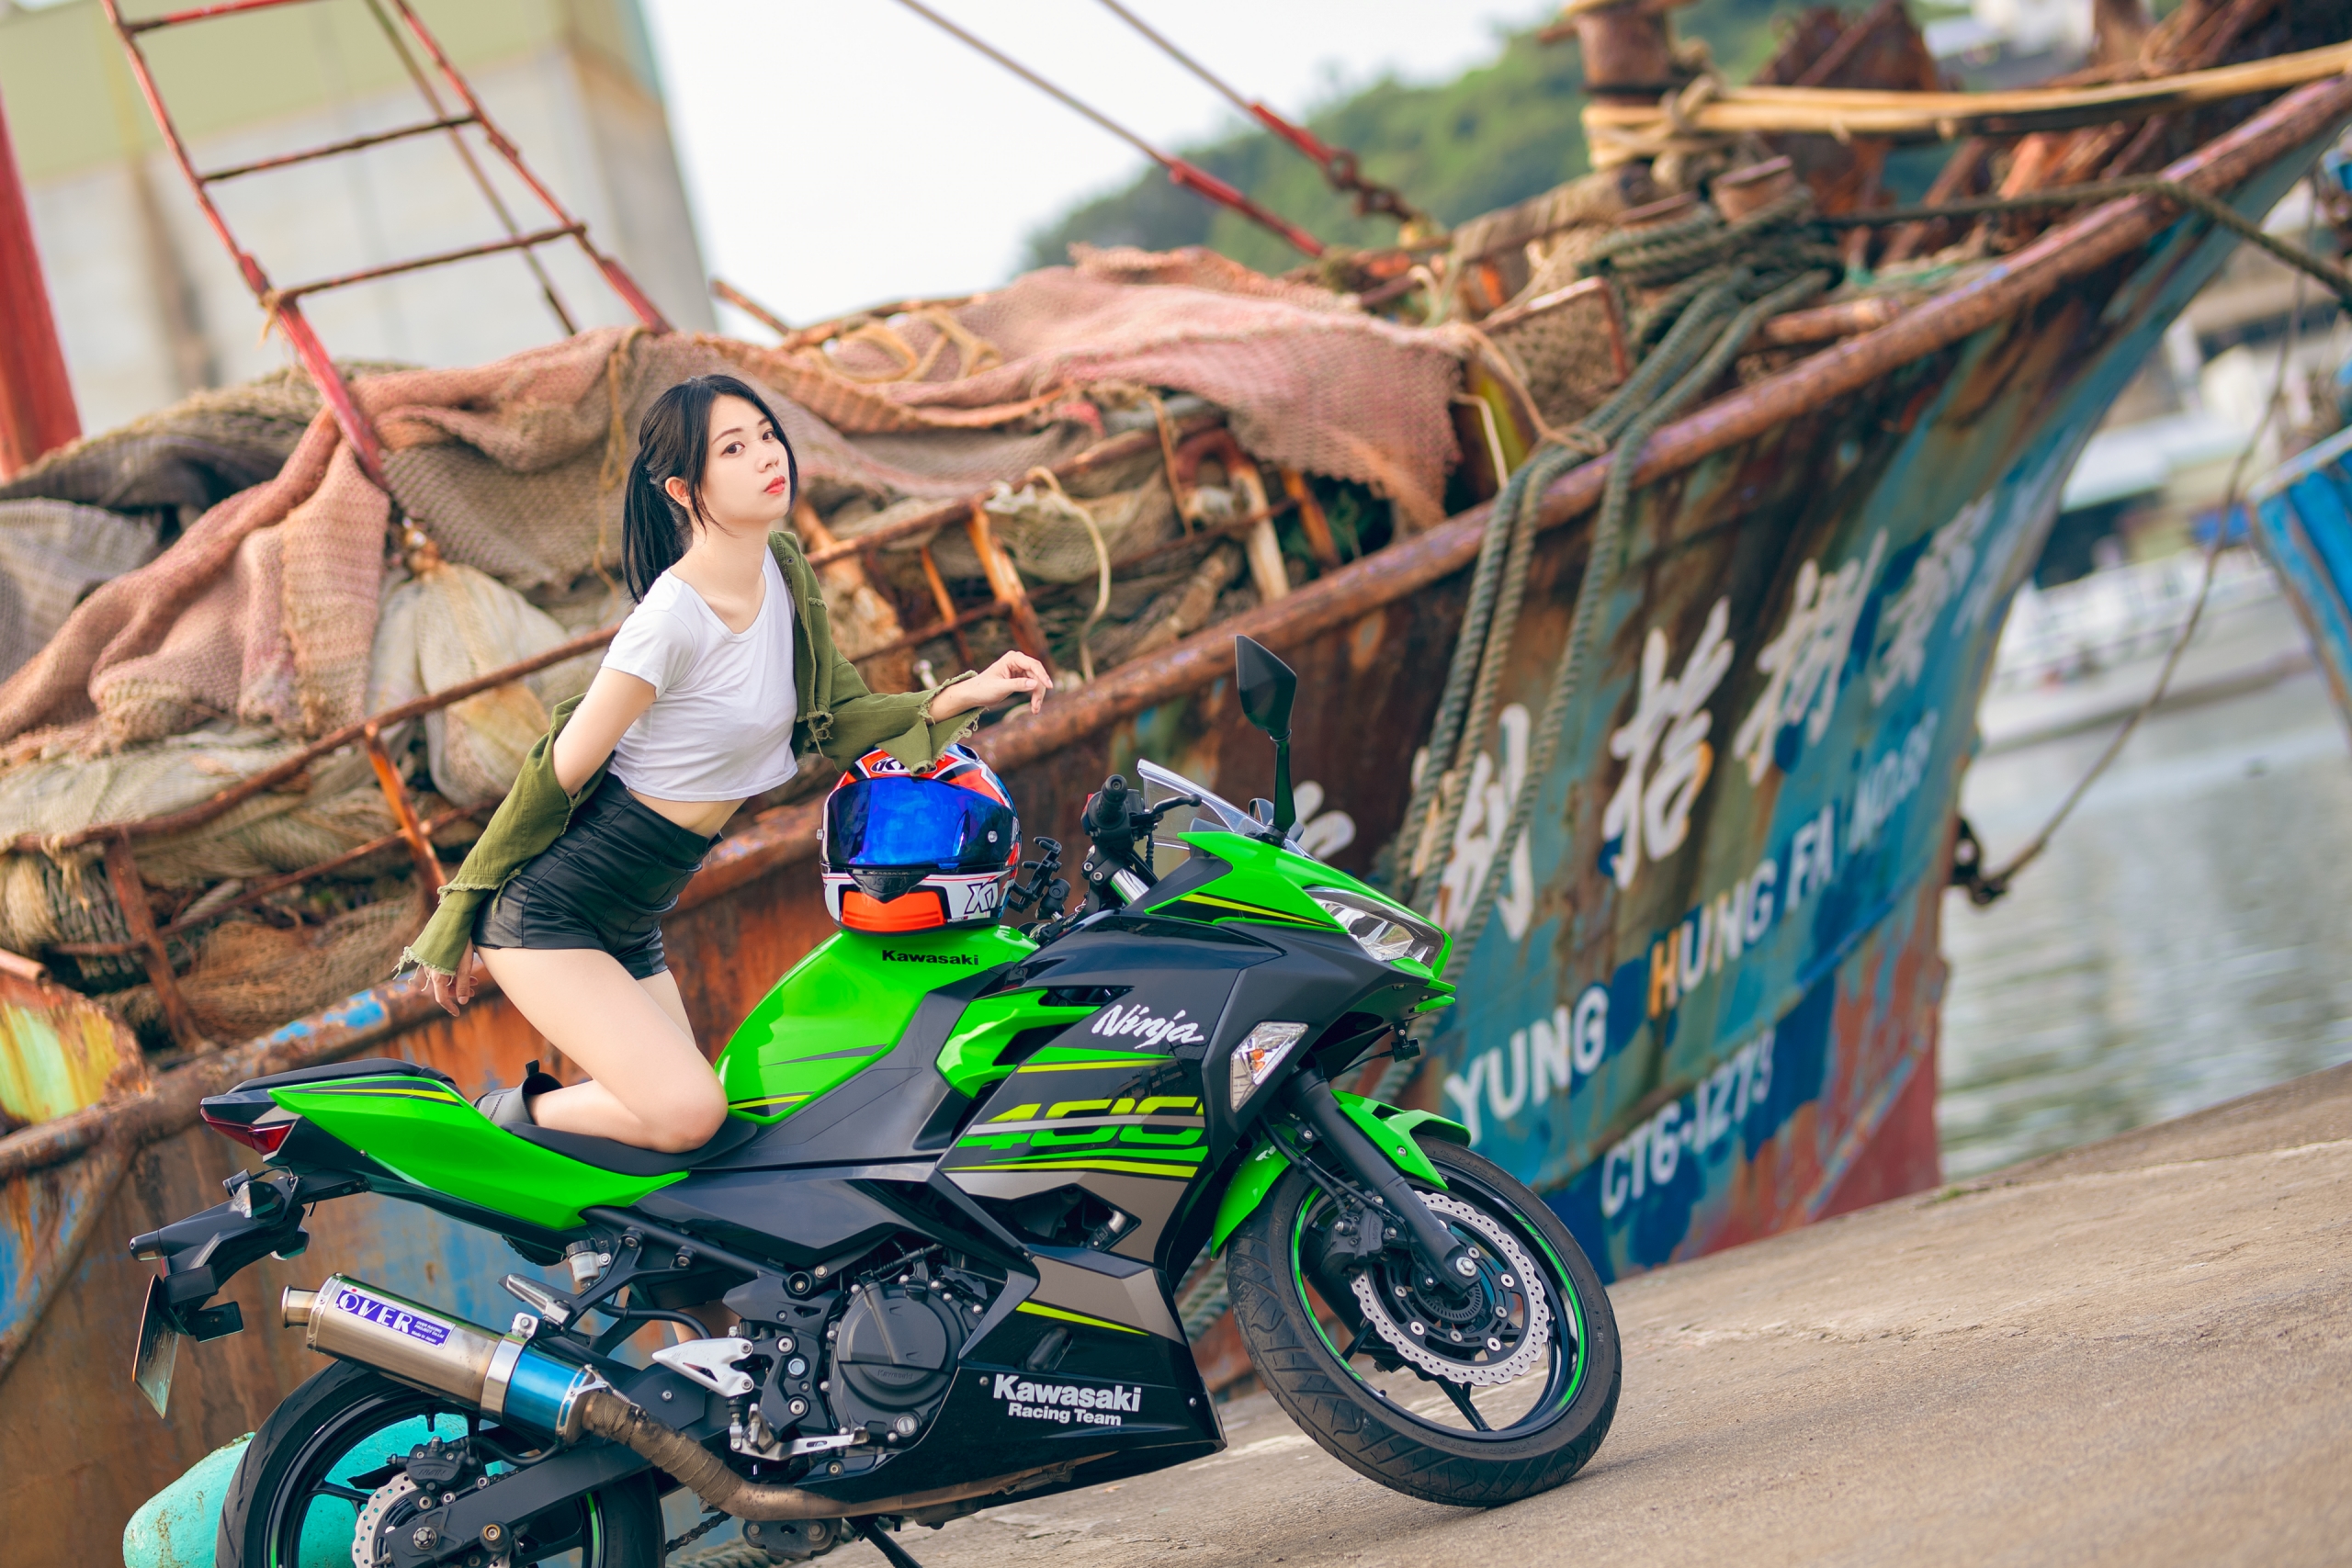 People 2560x1707 Asian women model brunette ponytail white tops short shorts jacket looking at viewer motorcycle women with motorcycles Kawasaki ship dock depth of field outdoors women outdoors